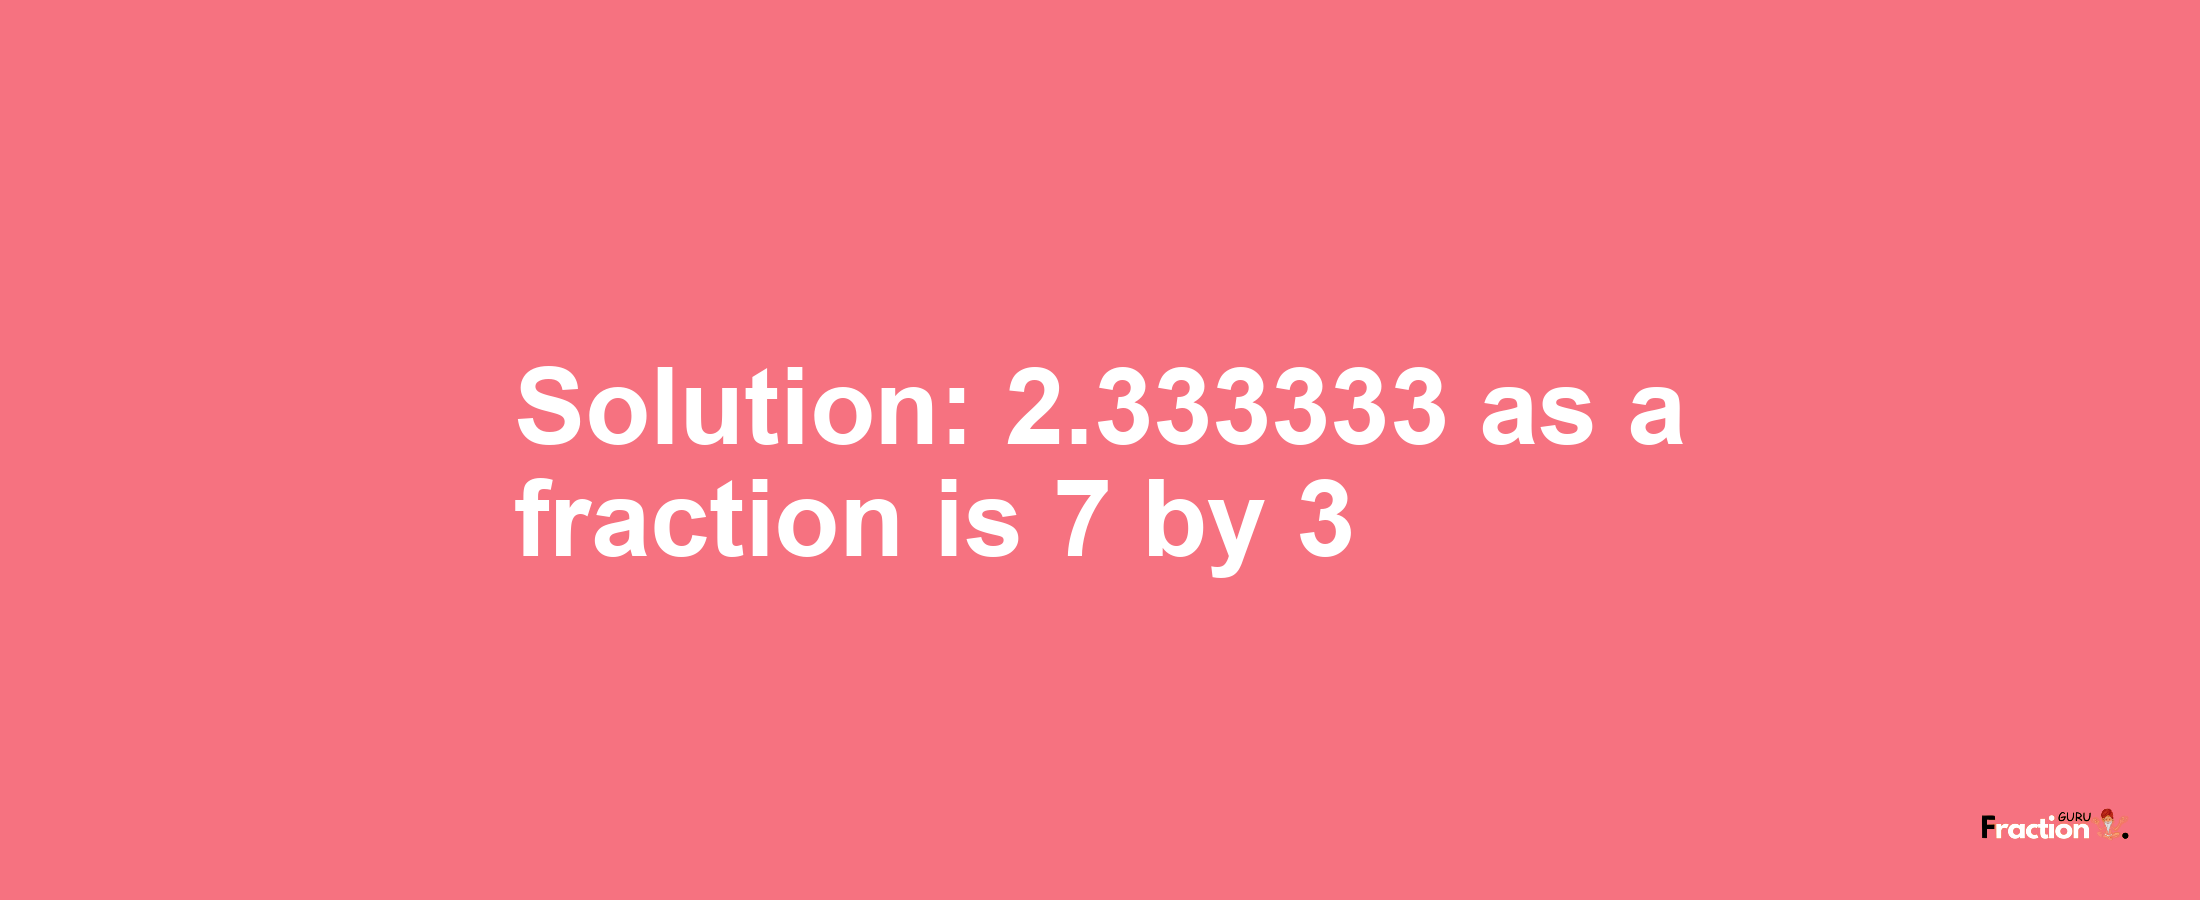 Solution:2.333333 as a fraction is 7/3